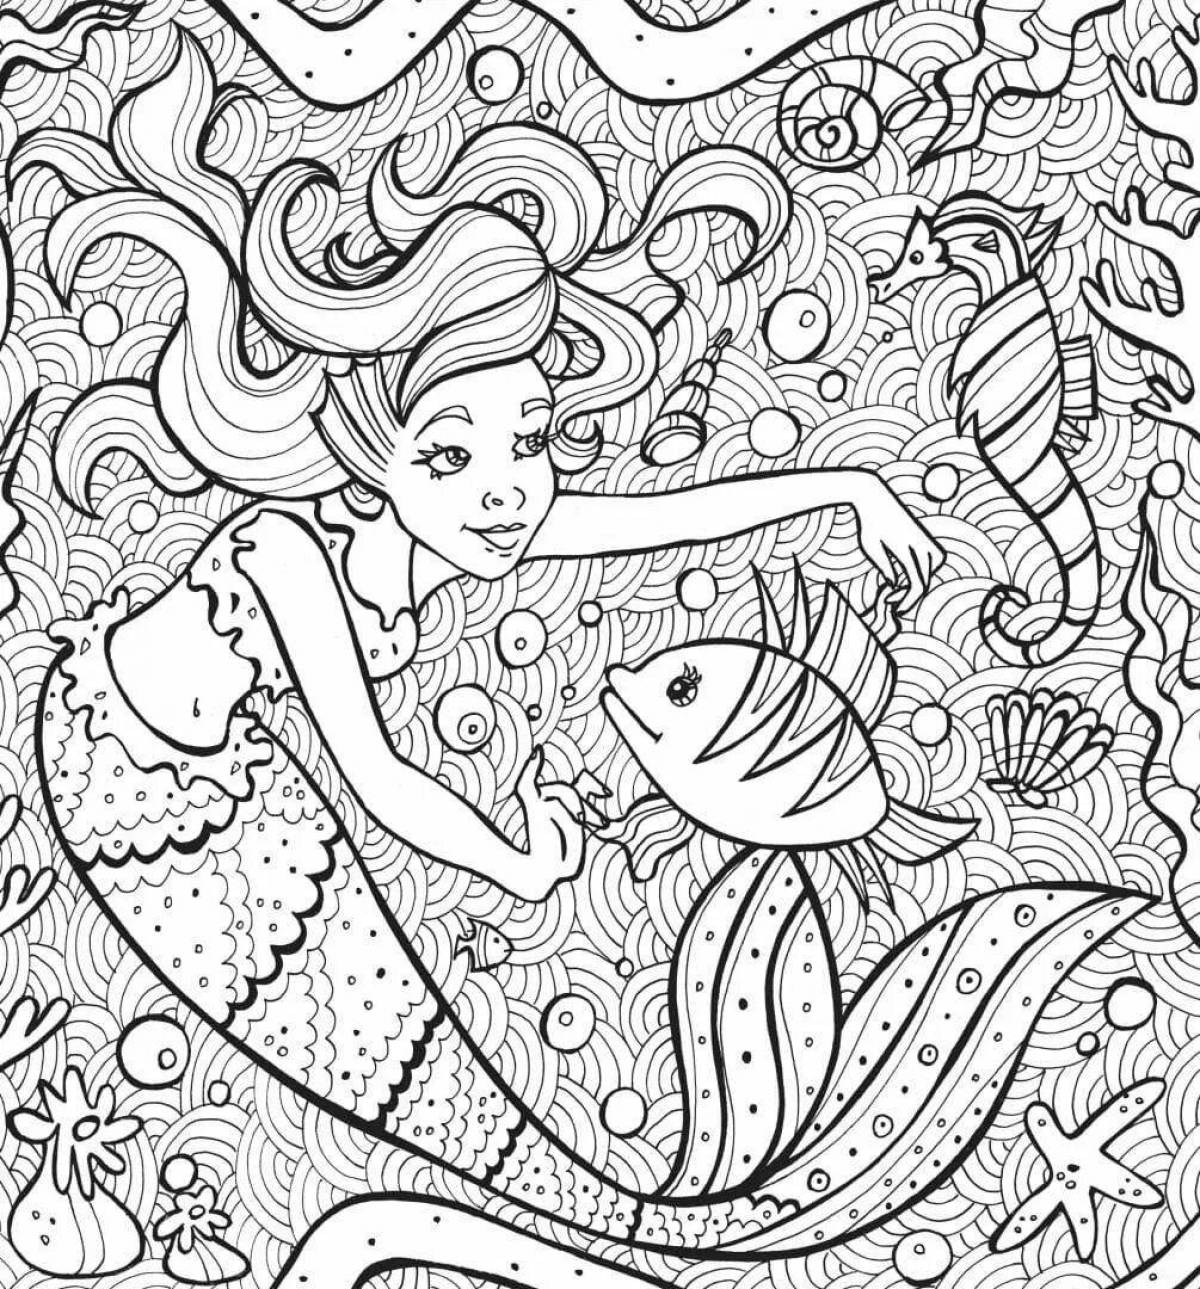 Charming anti-stress coloring book for girls 8 years old